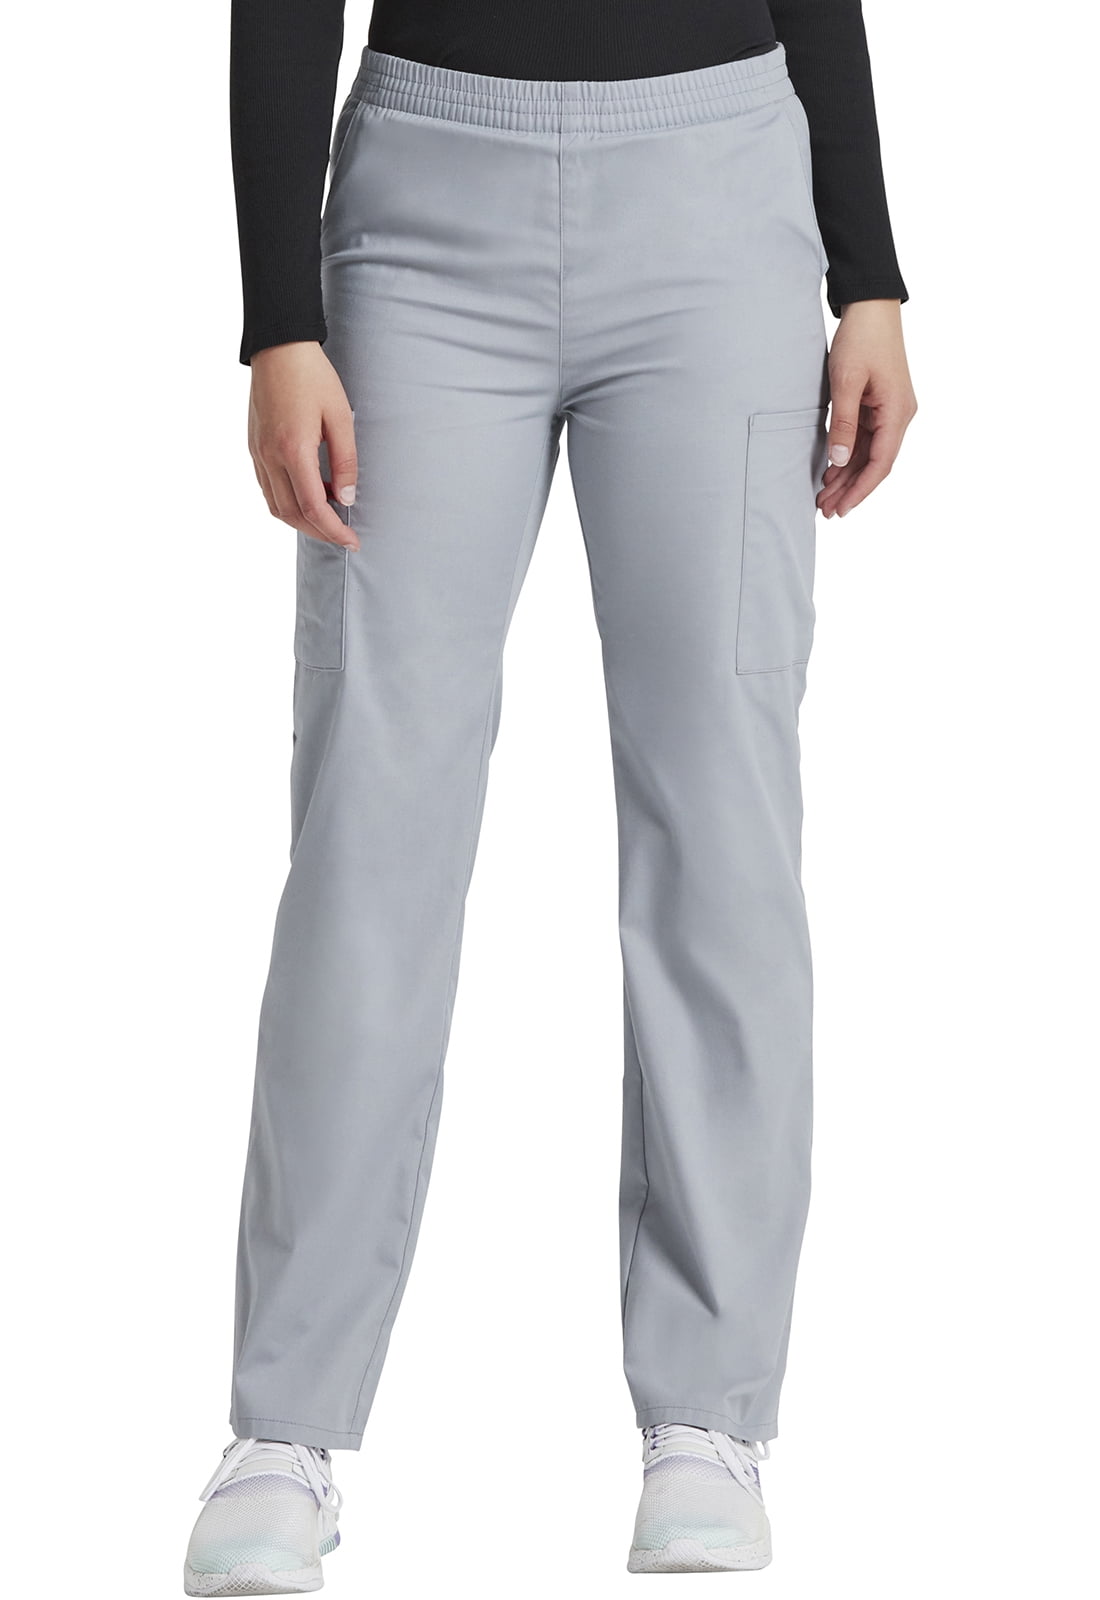 Dickies EDS Signature Scrubs Pant for Women Natural Rise Tapered Leg  Pull-On 86106, XS, Grey 